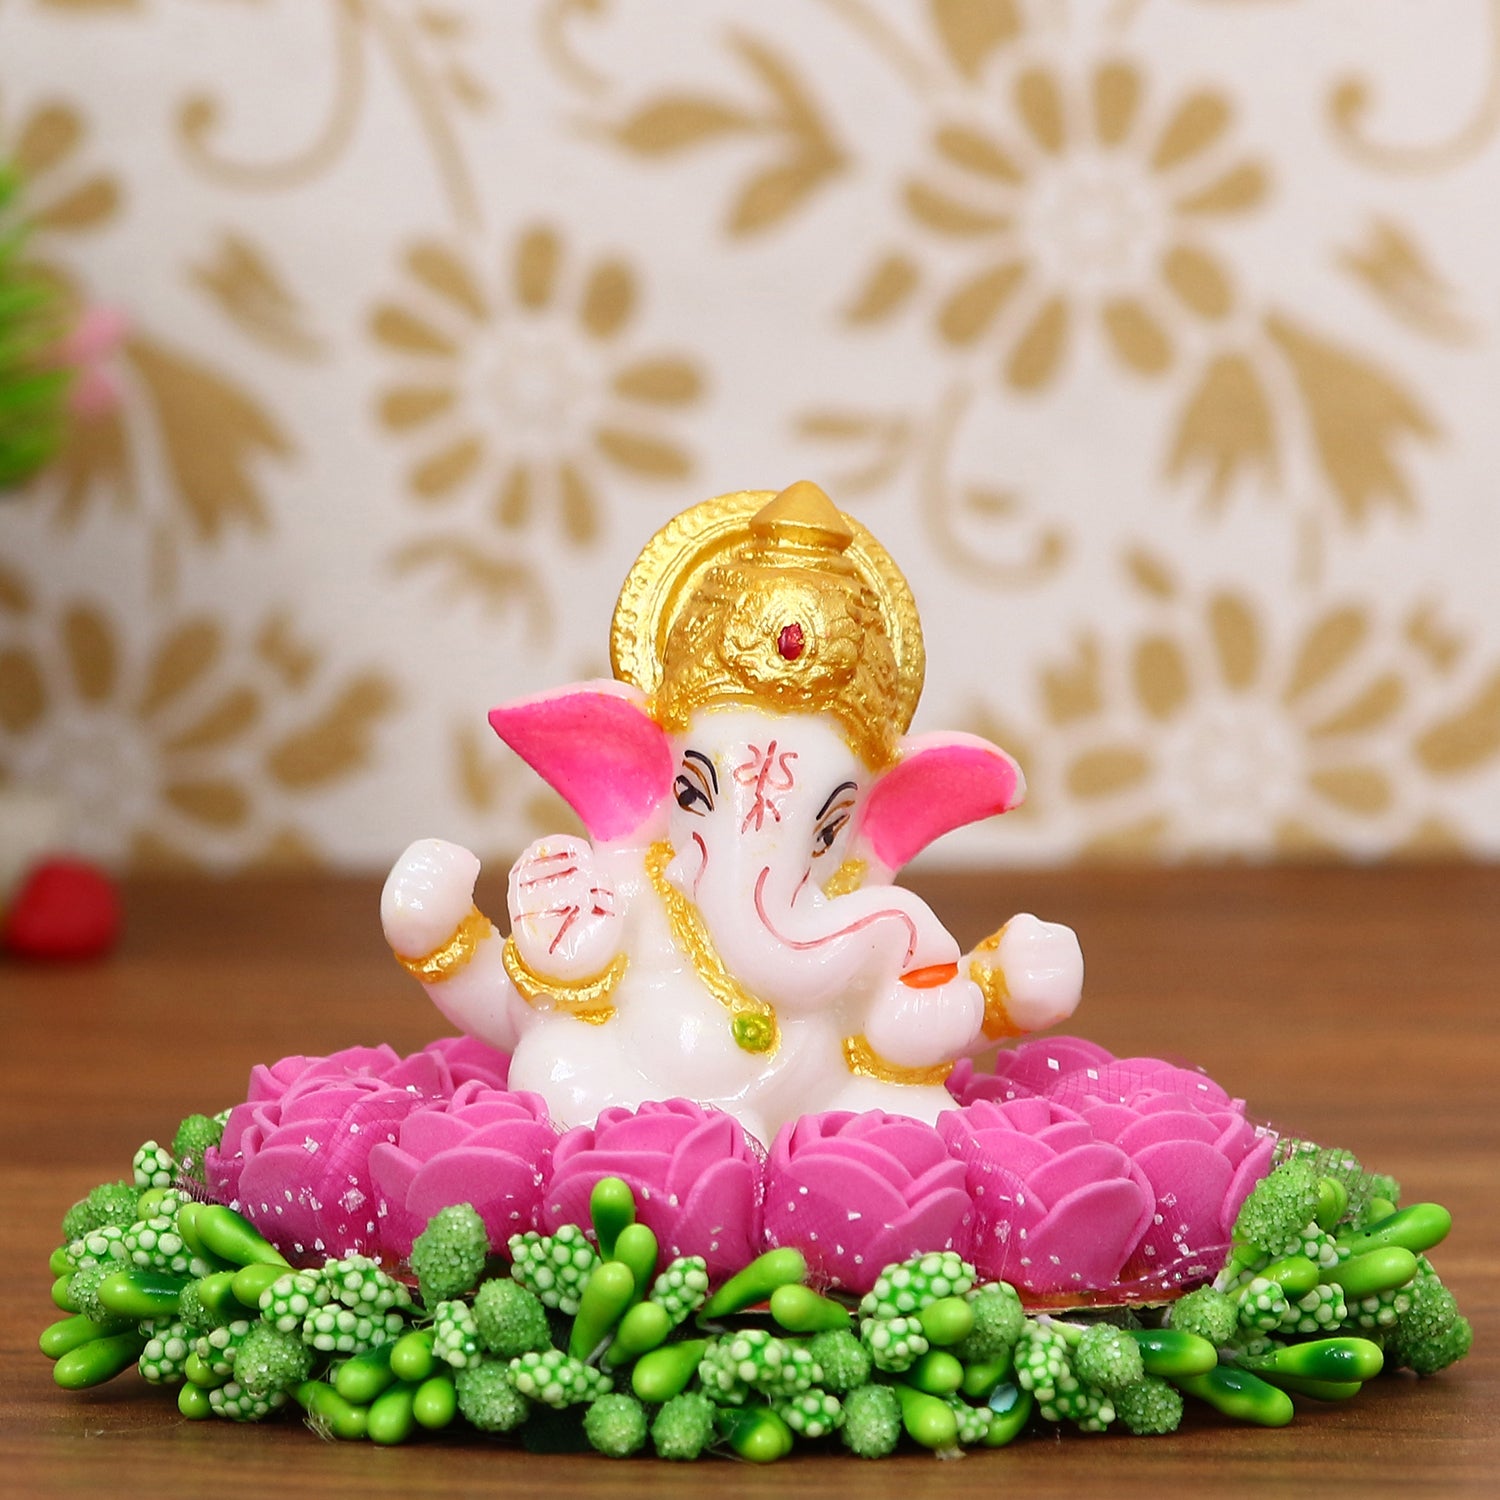 Lord Ganesha Idol On Decorative Handcrafted Pink Flowers Plate